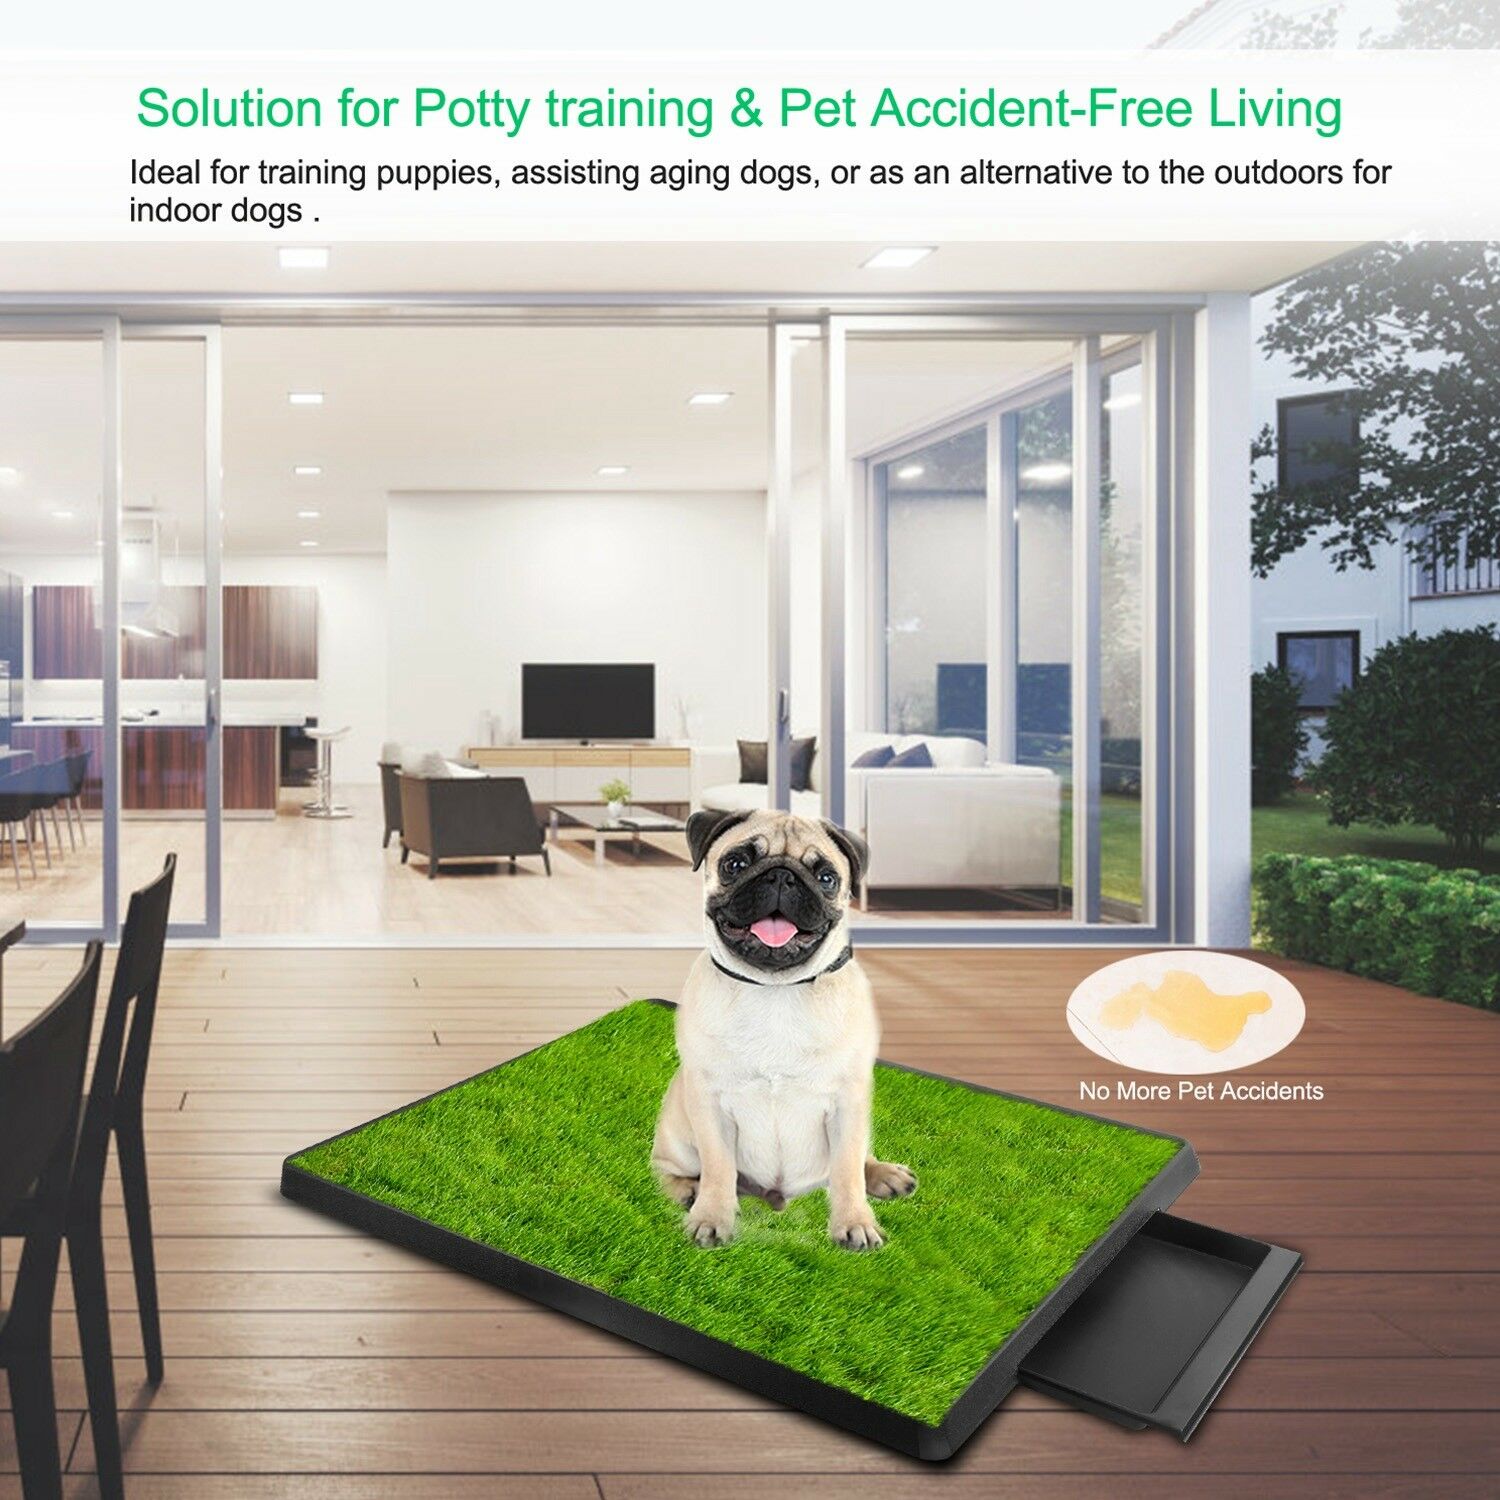 Pet Toilet Trainer Grass Mat for Puppy Potty Training - Solution for Potty Training